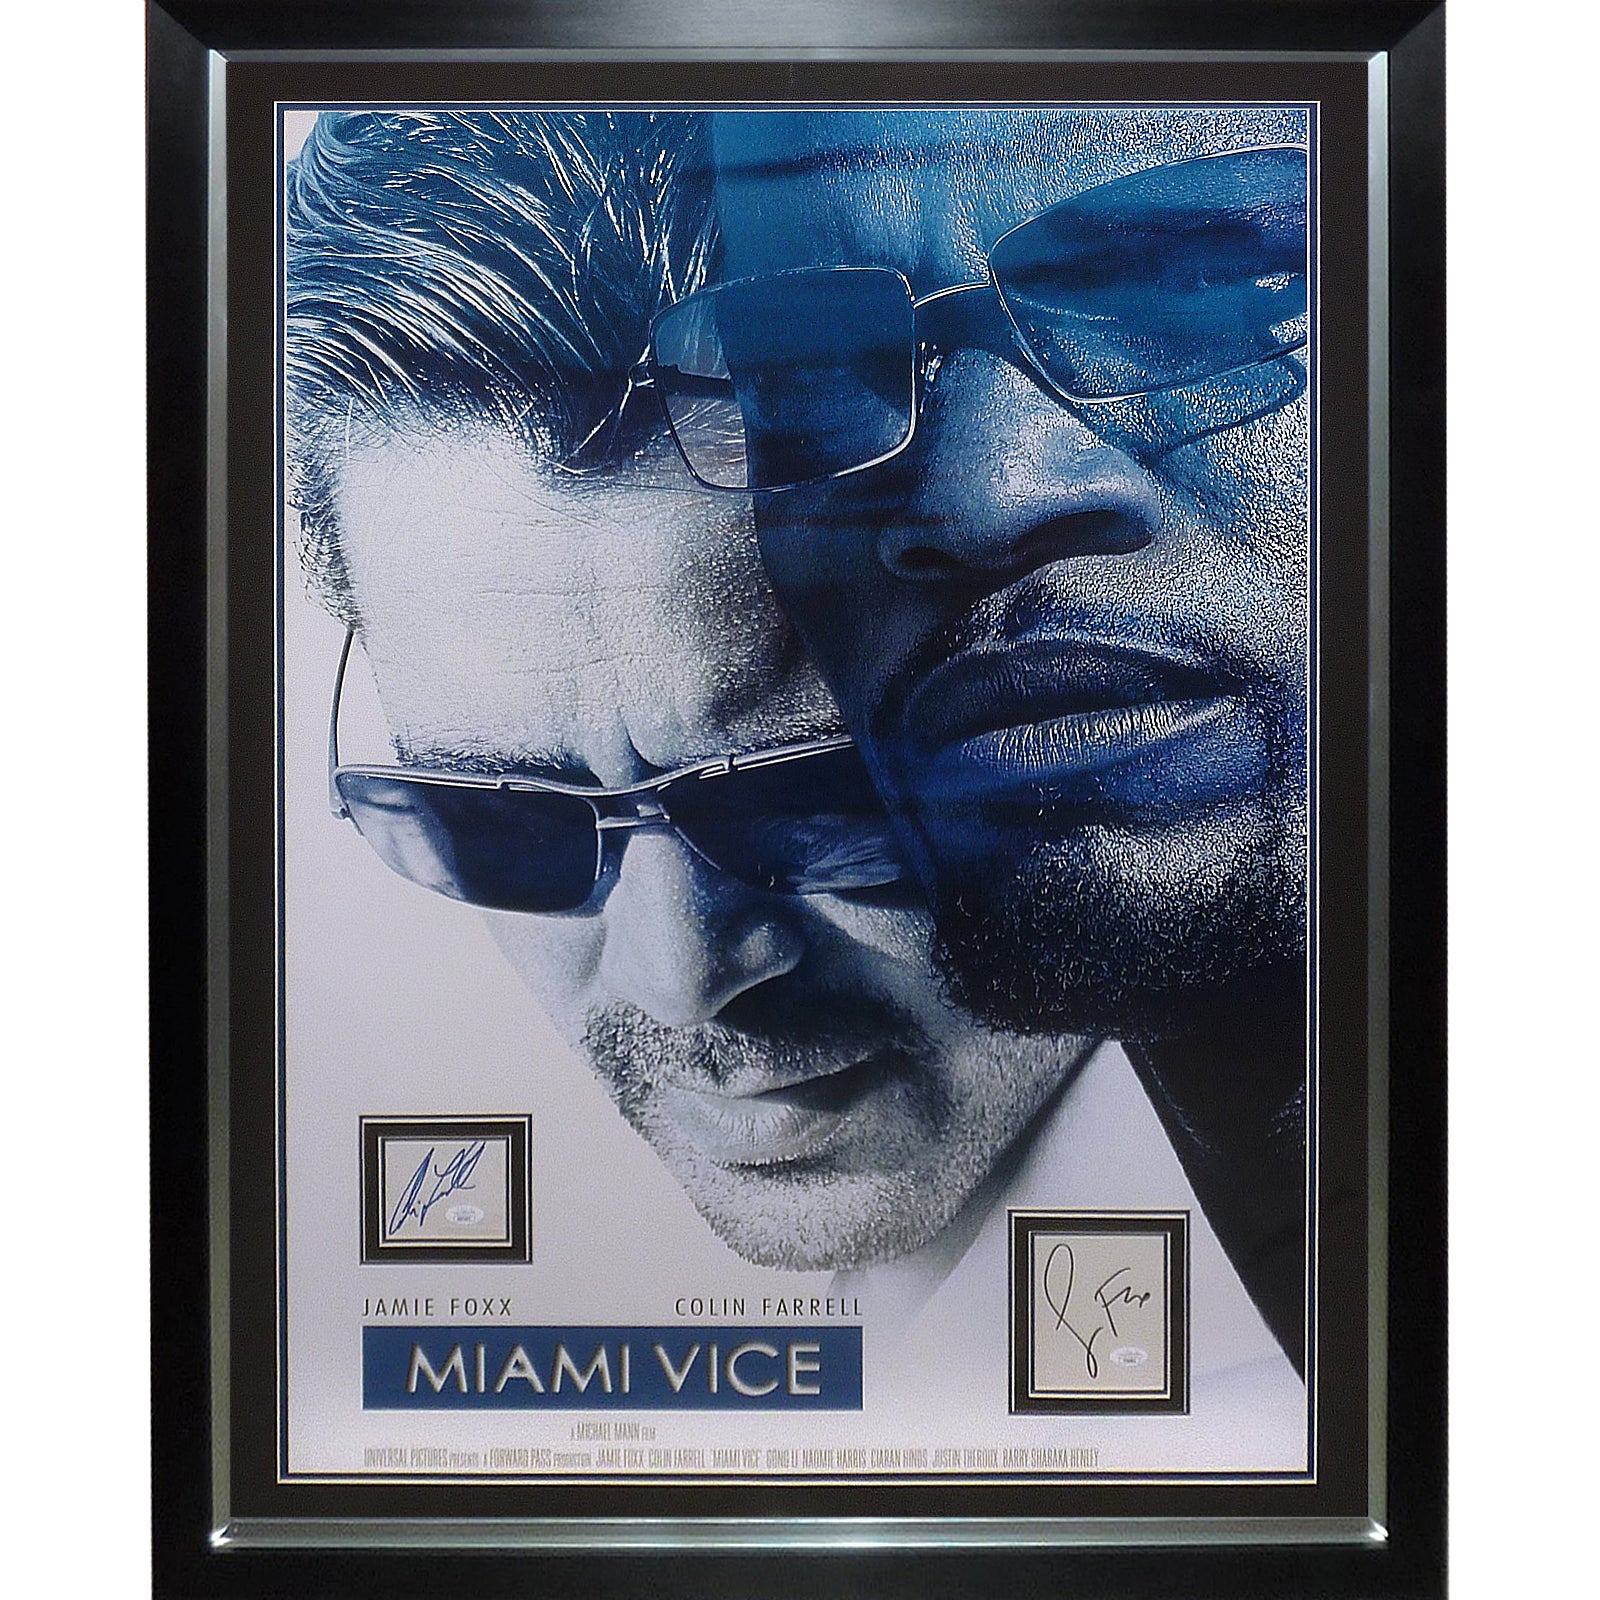 Miami Vice (2006) Full-Size Movie Poster Deluxe Framed with Colin Farrell And Jamie Foxx Autographs - JSA